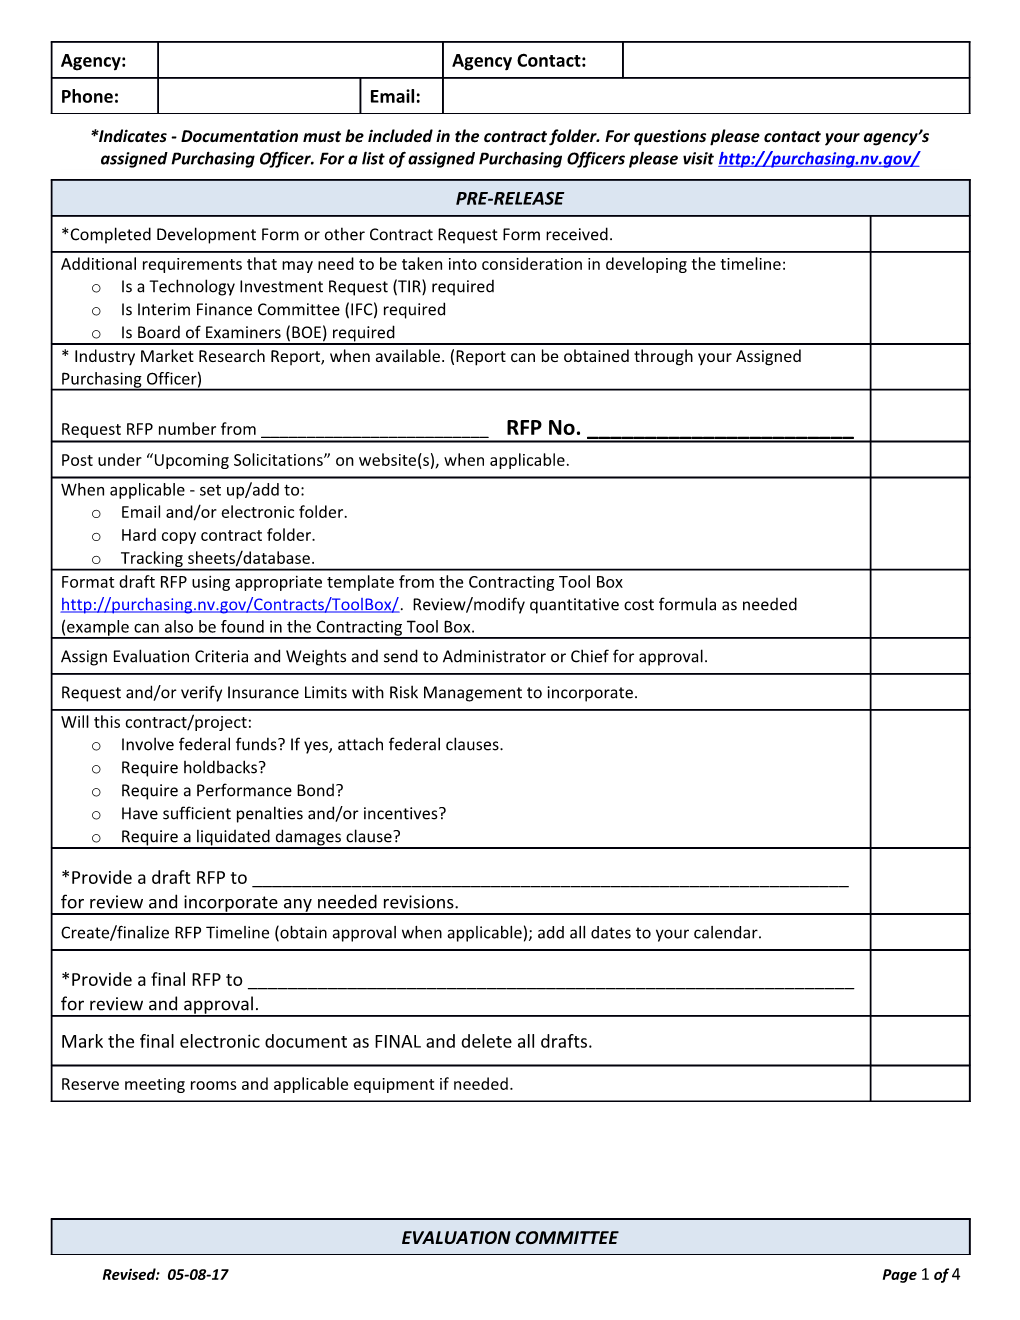 Agency Request for Proposal (Rfp) Checklist